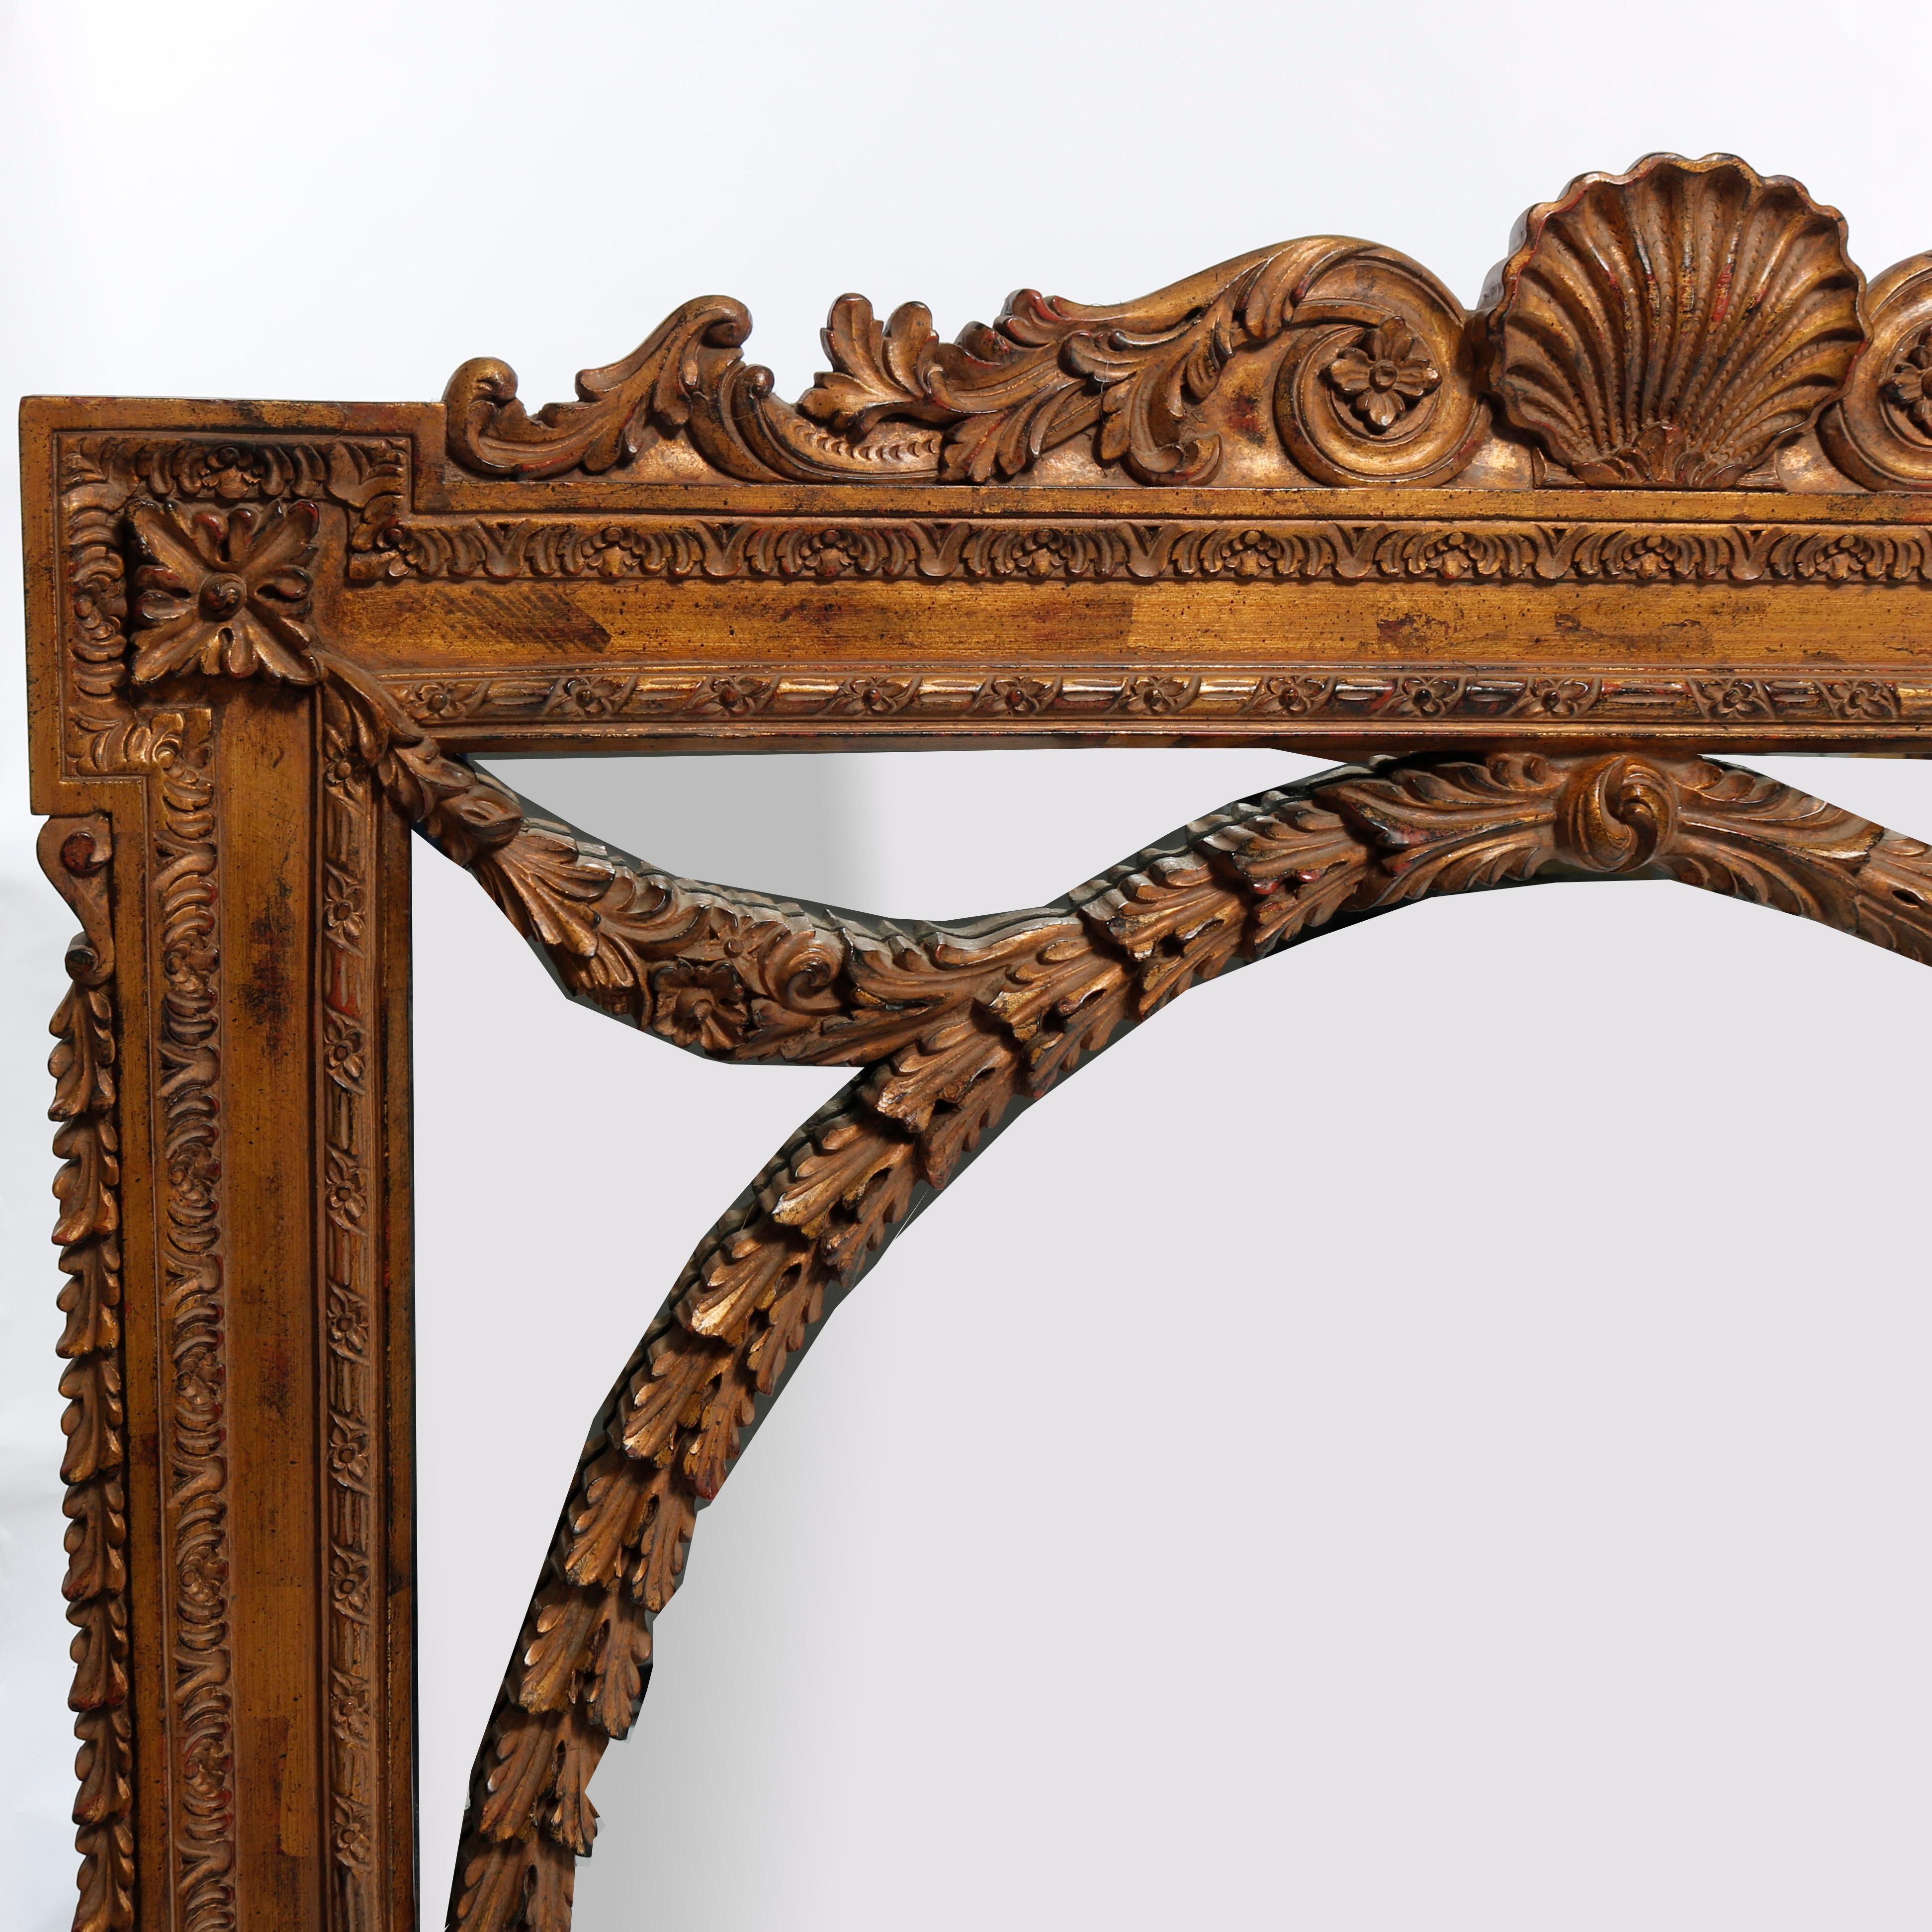 American Pair of Oversized French Empire Style Giltwood Over Mantle Mirrors 20th C